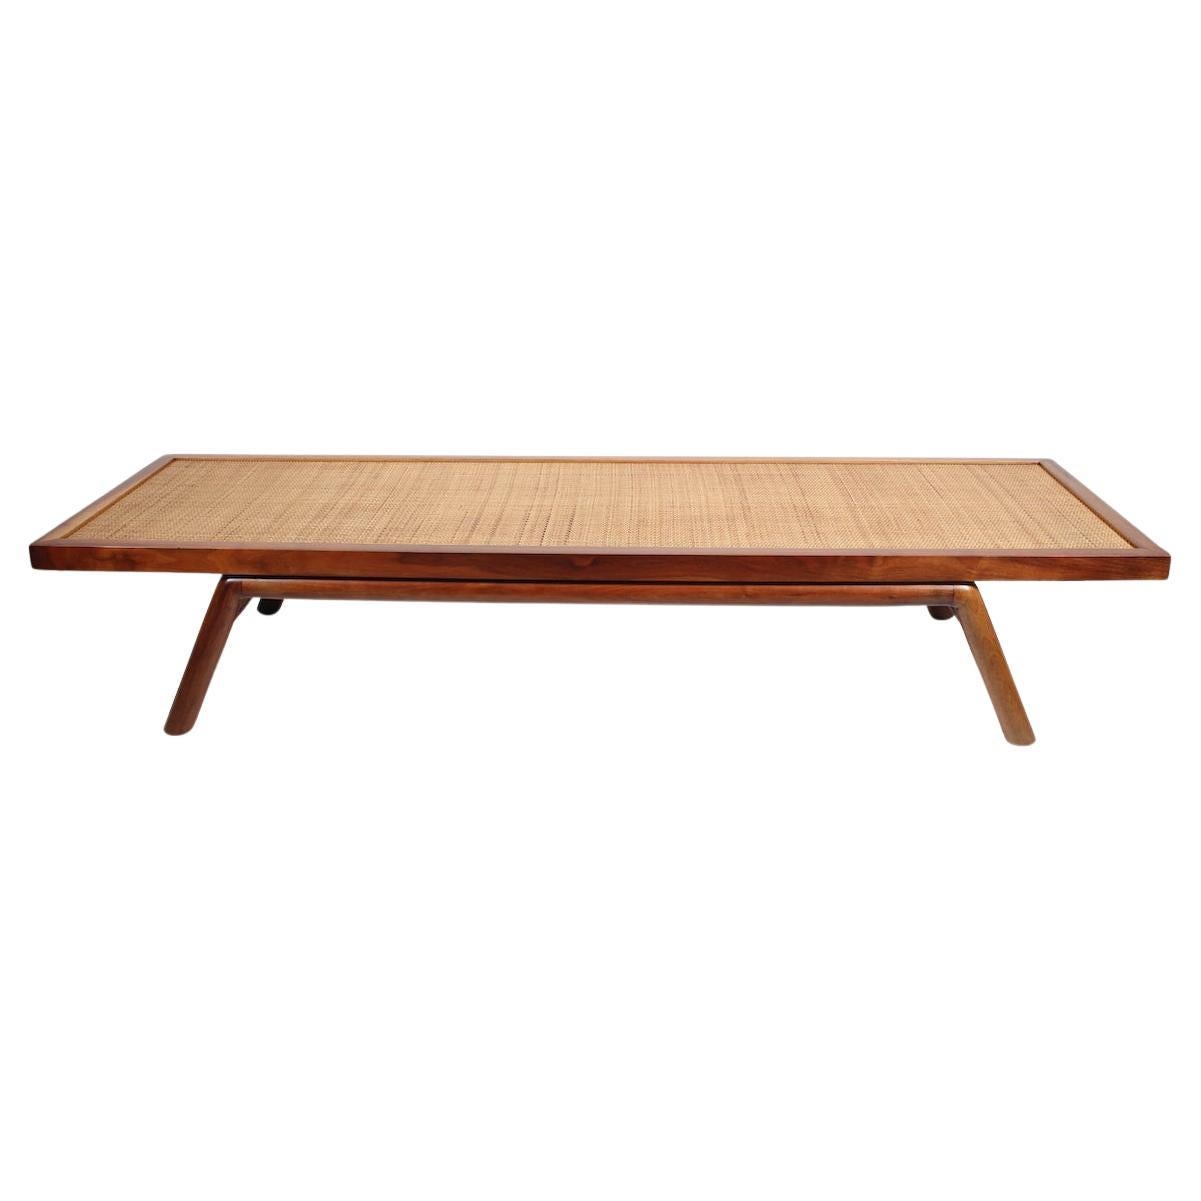 T. H. Robsjohn-Gibbings Low Mahogany & Cane Bench, Coffee Table, 1950's For Sale